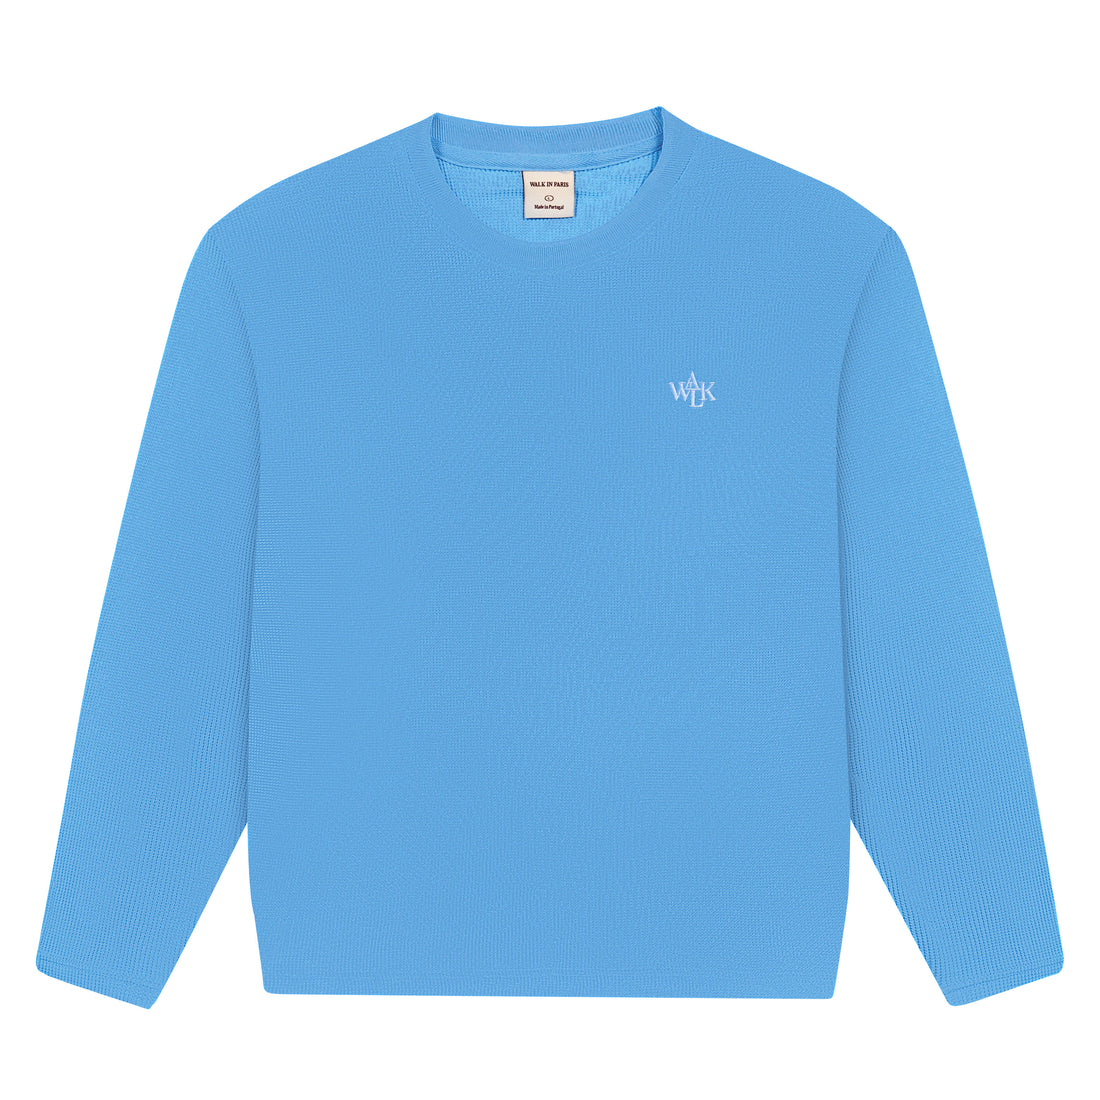 The blue long sleeves